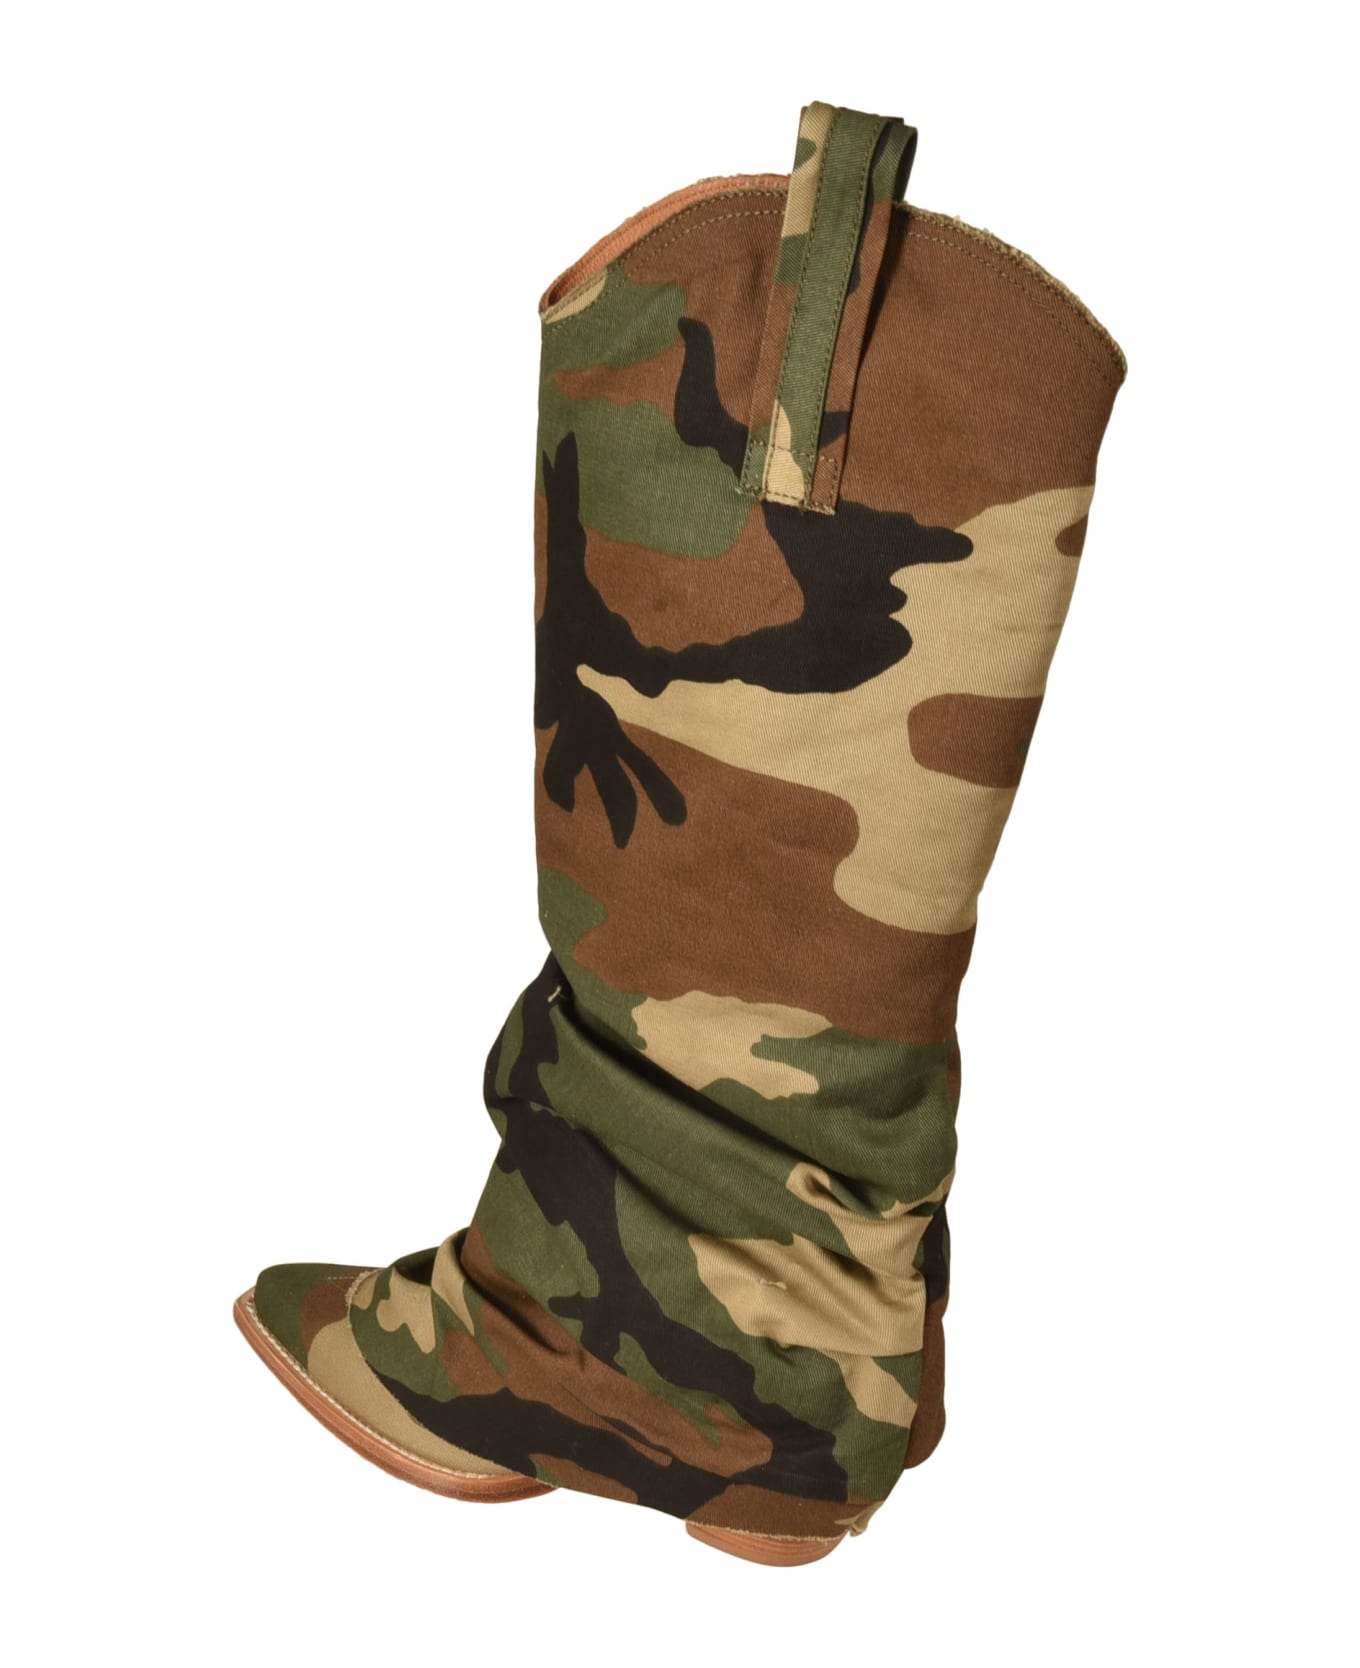 R13 Pointed Toe Mid Cowboy Boots - Camo